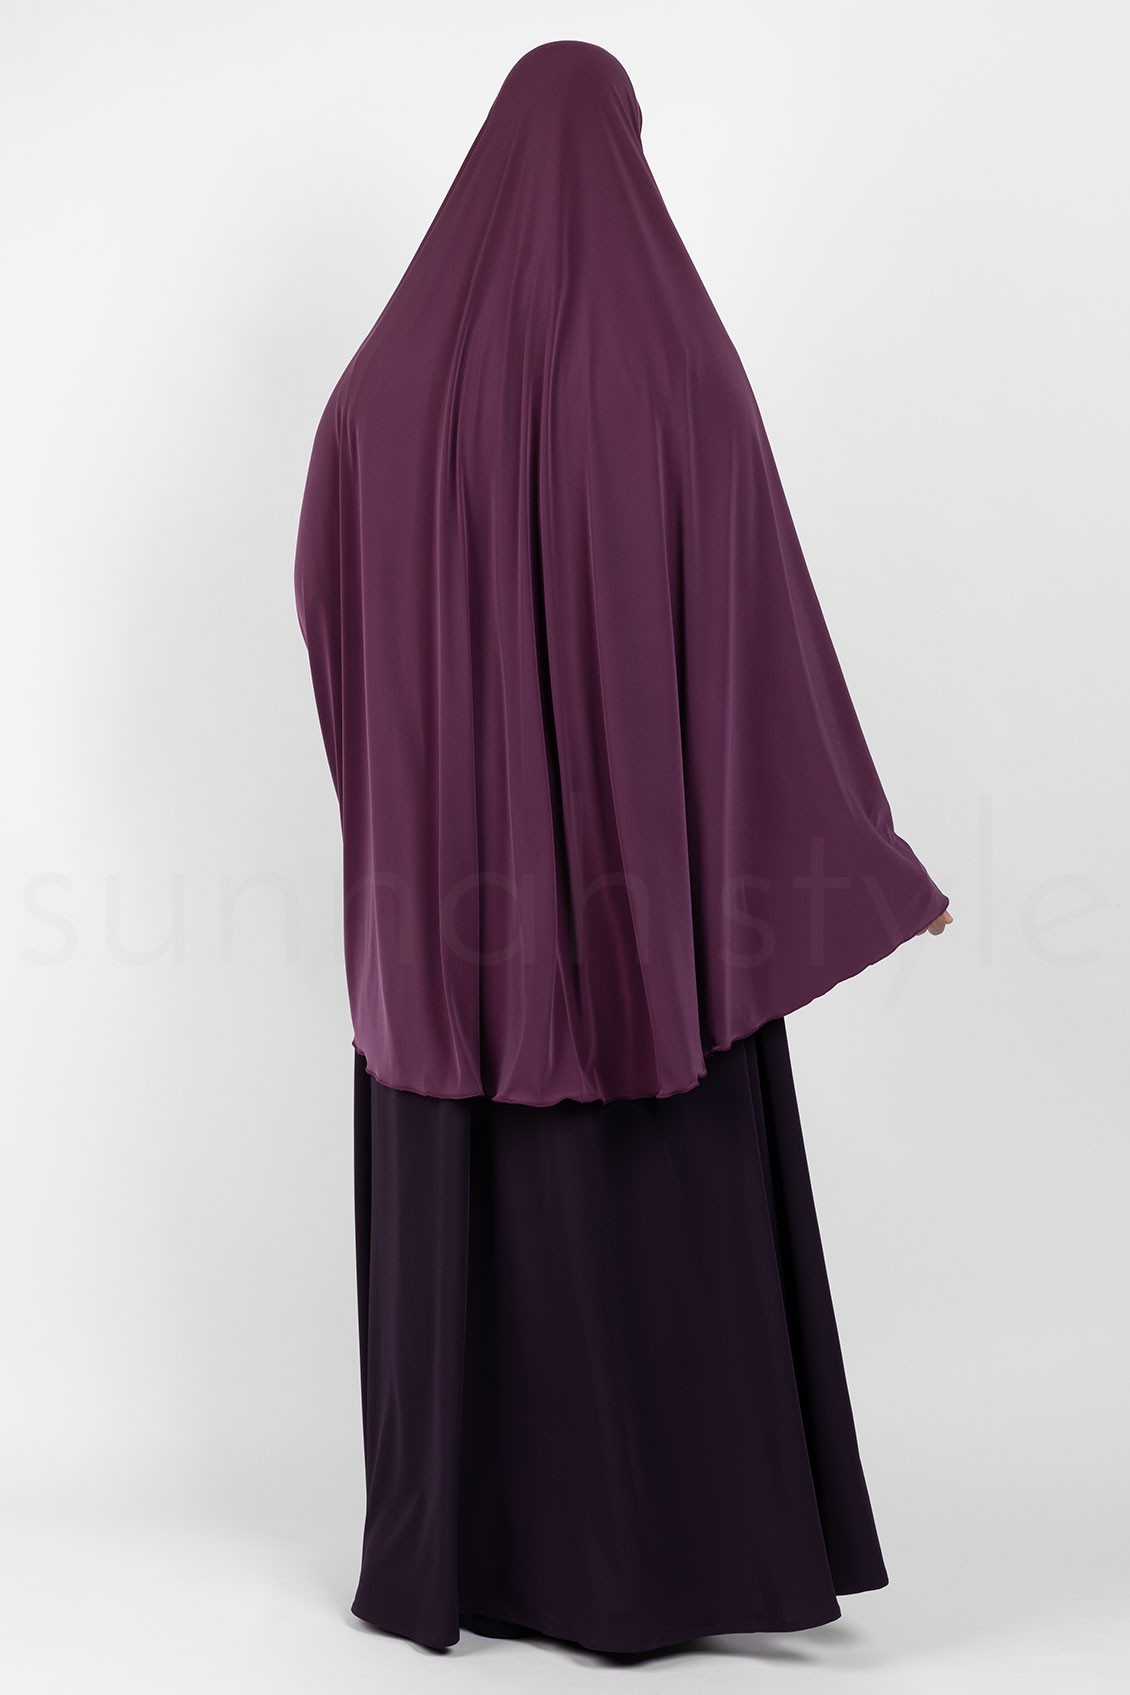 Sunnah Style Jersey Khimar Thigh Length Mulberry